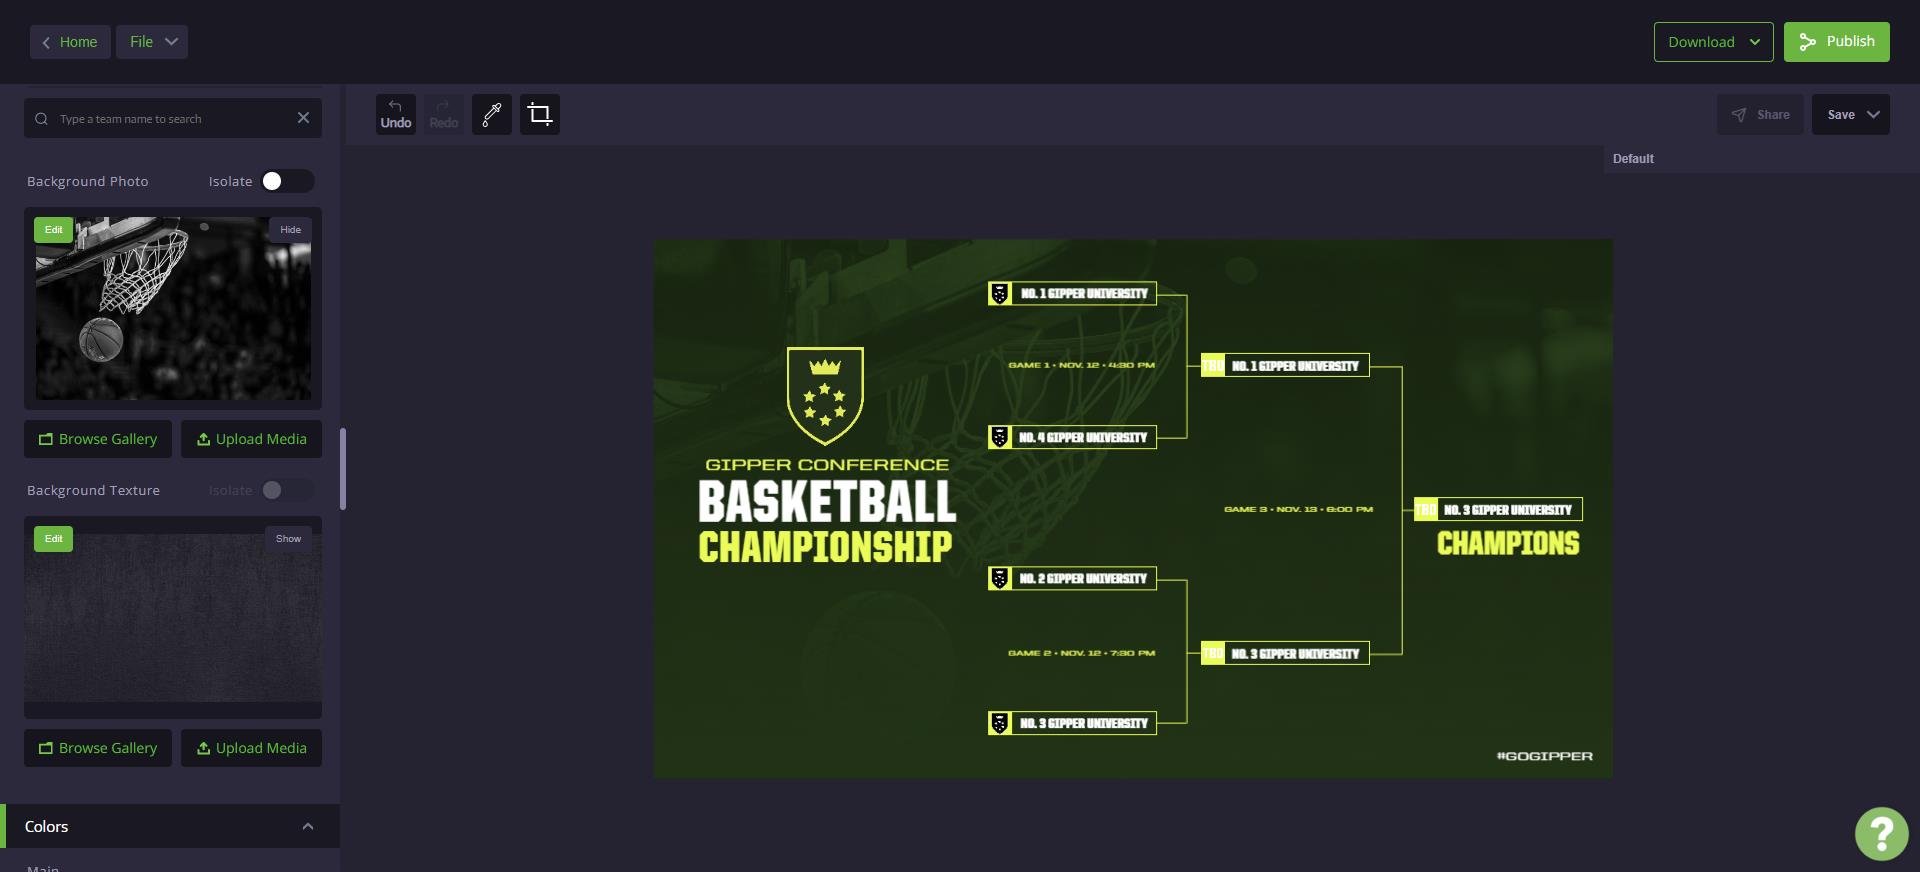 template editor showing bracket graphic where user can change color, text, and images to match their branding
